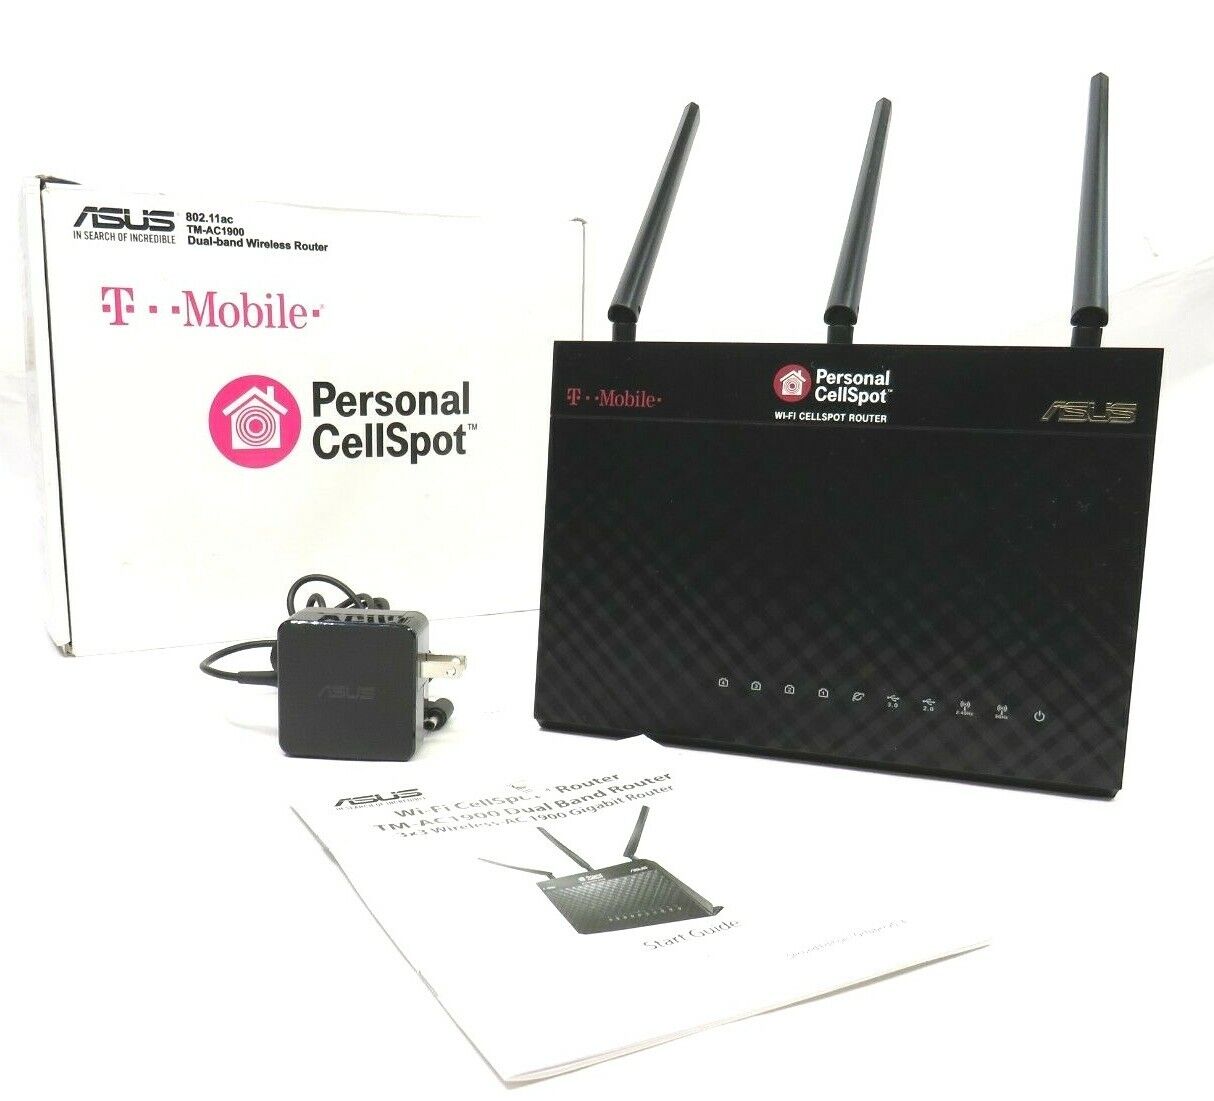 T-Mobile ASUS TM-AC1900 Dual Band Wireless Router Personal Wi-Fi CellSpot